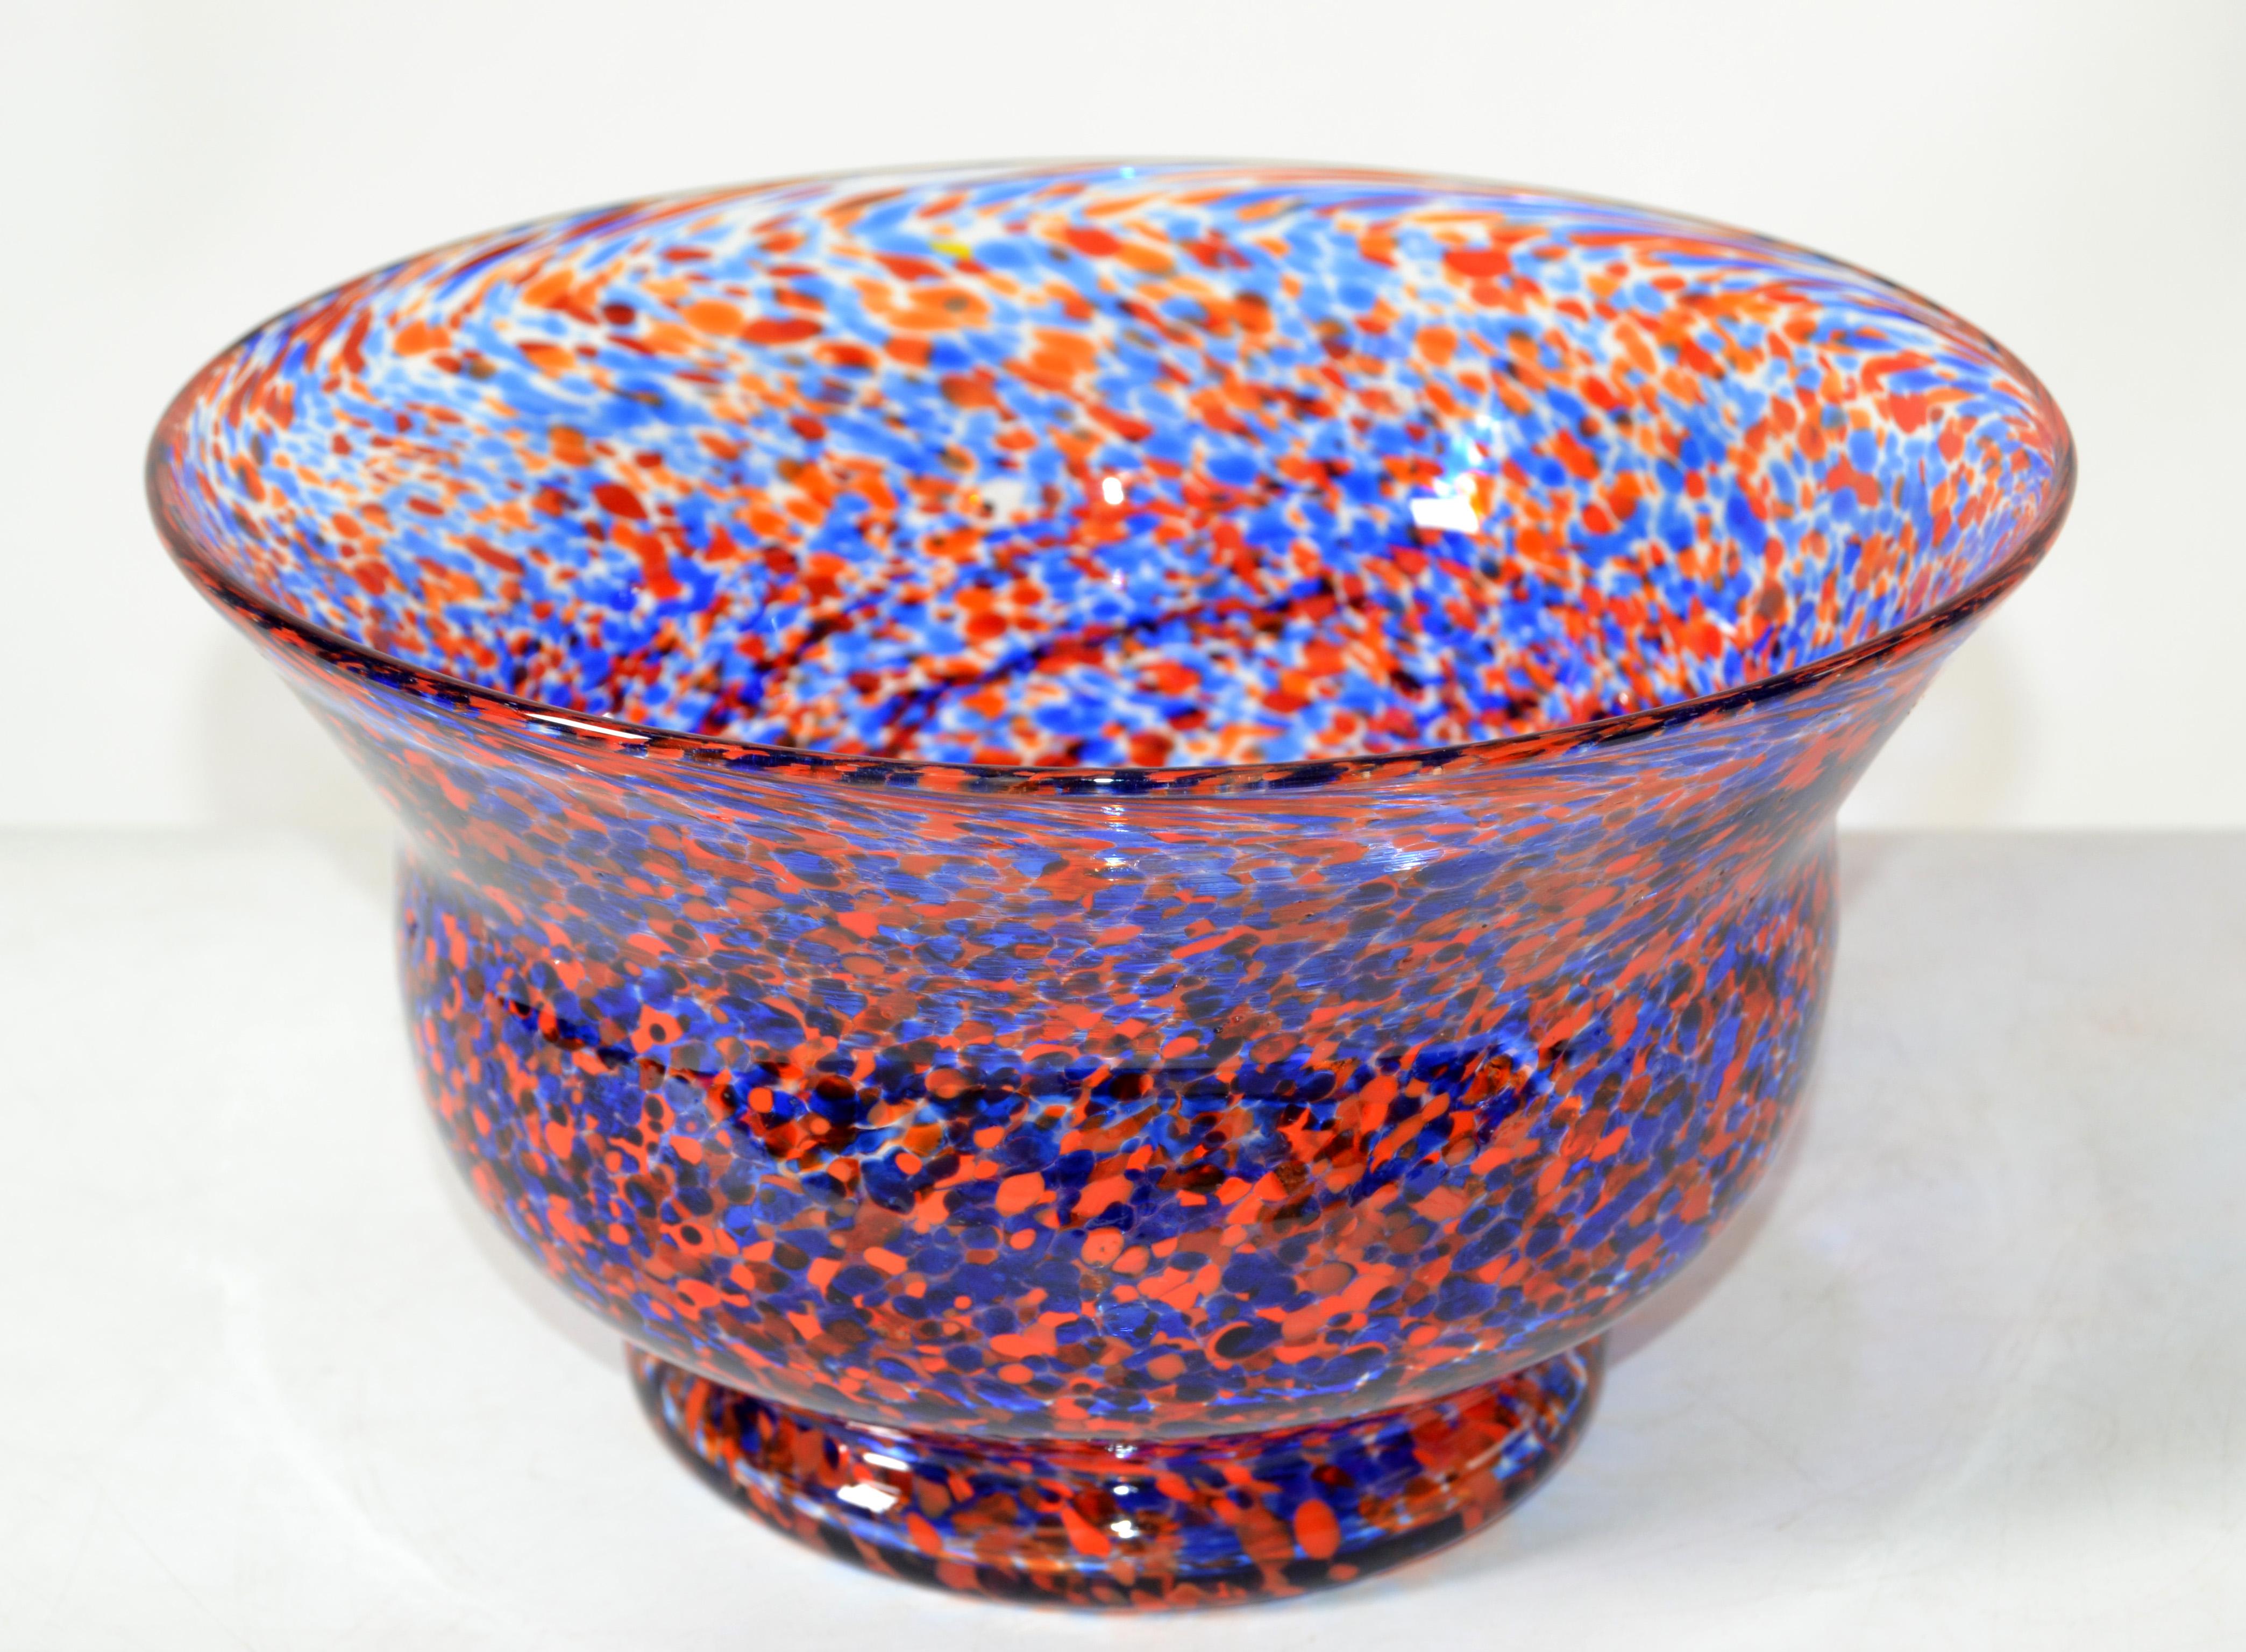 Handmade Venetian murano glass bowl in the color of orange and blue.
Mid-Century Modern centerpiece from Italy.